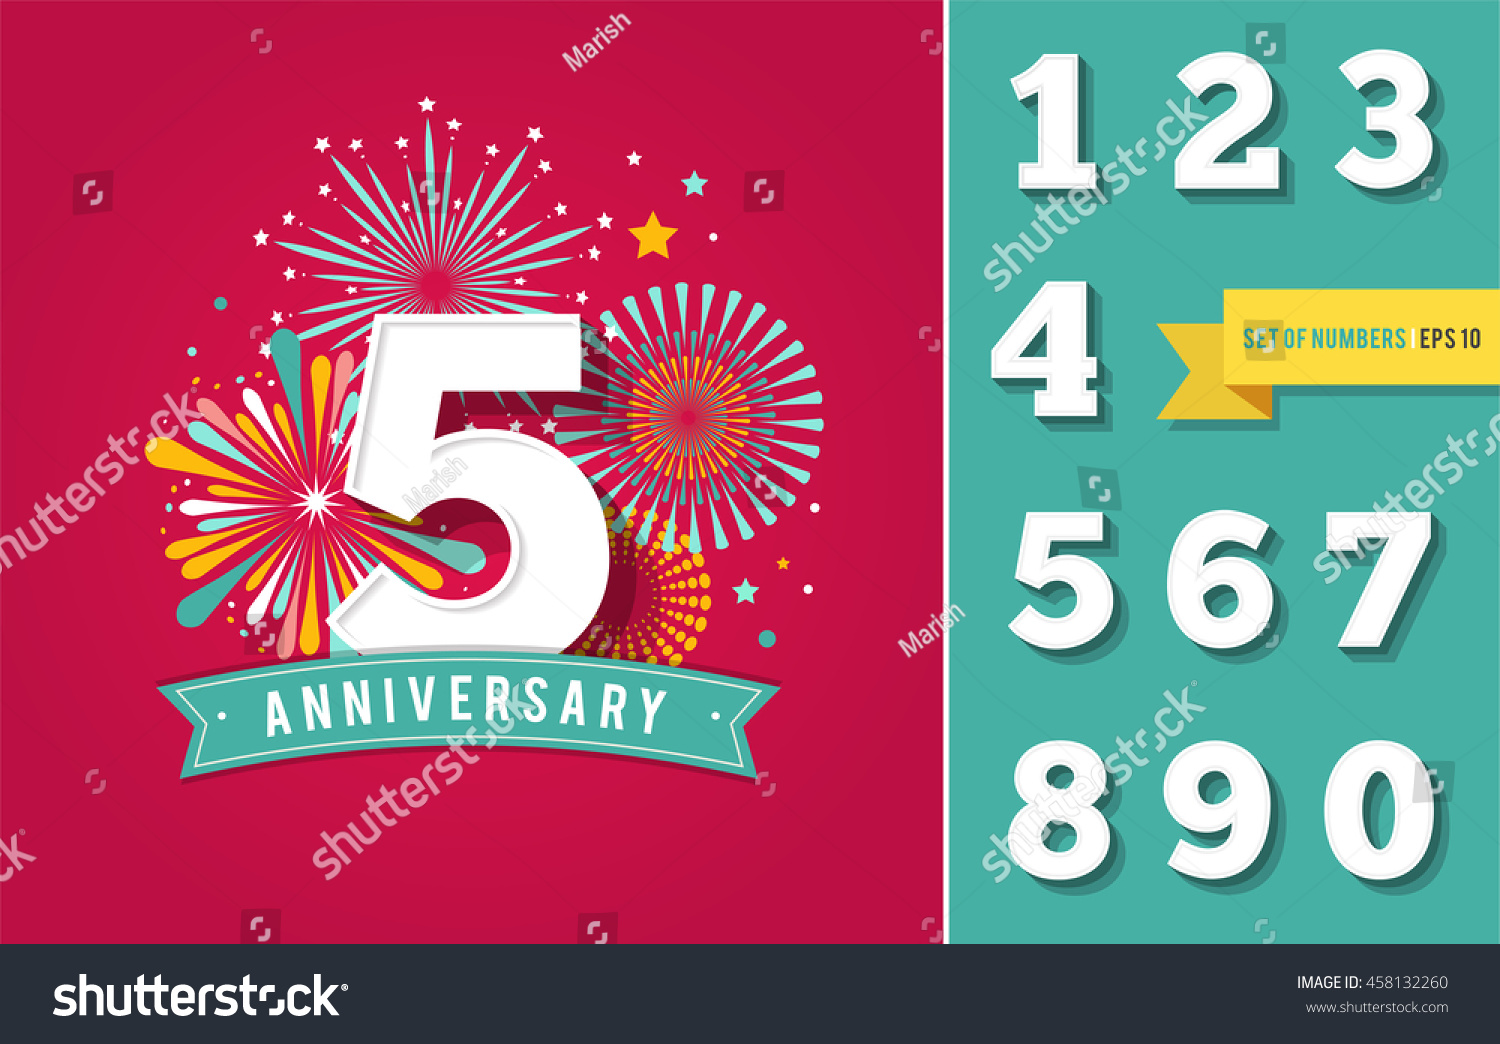 SVG of Anniversary fireworks and celebration background, set of numbers svg